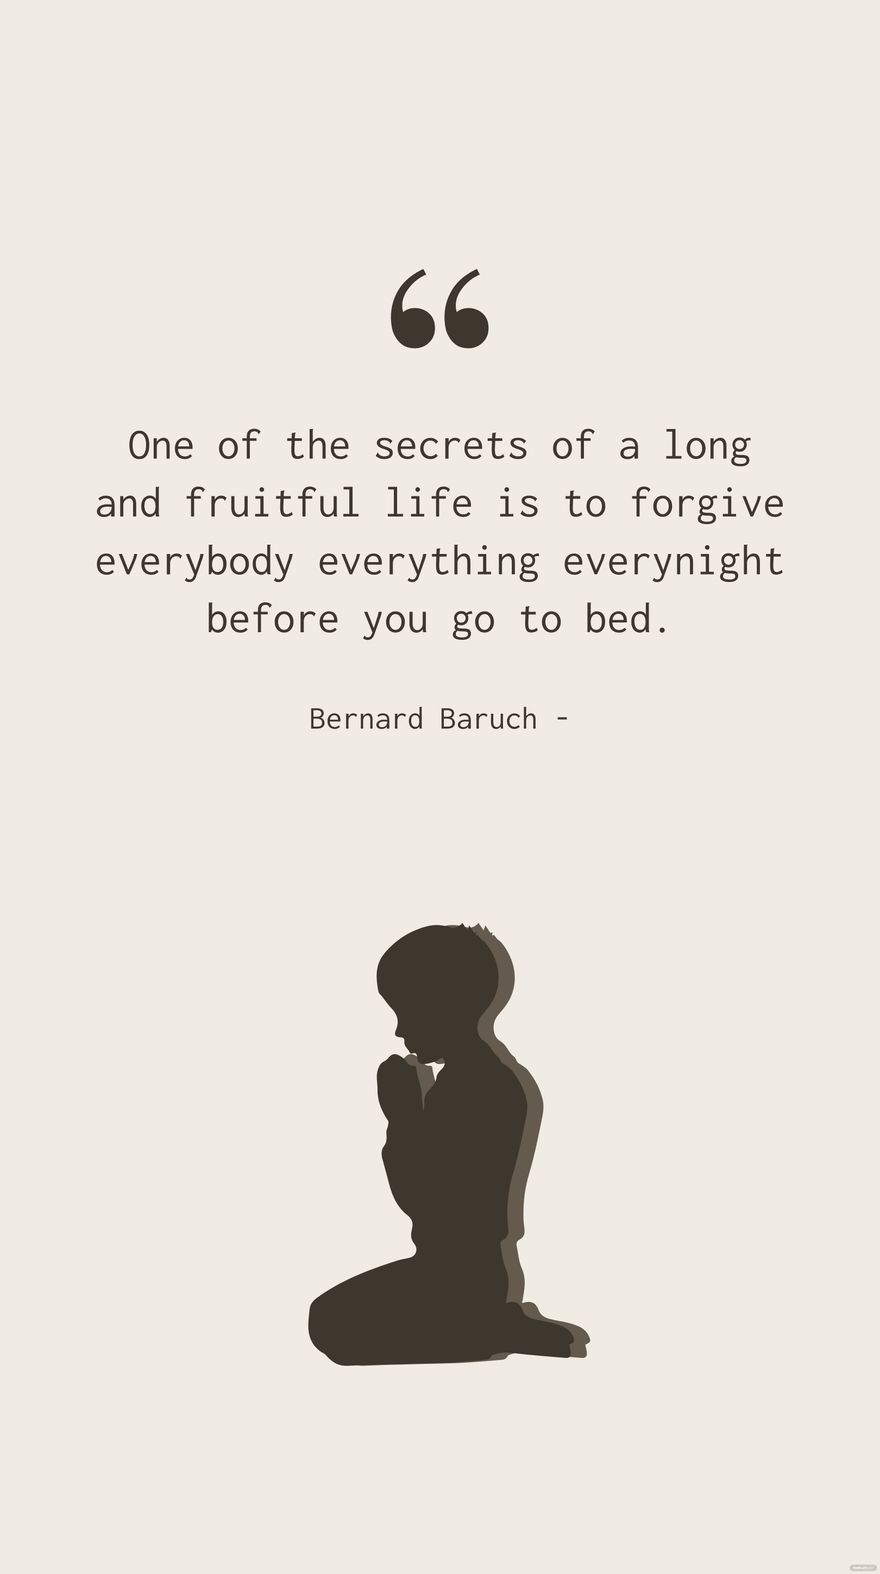 Bernard Baruch - One of the secrets of a long and fruitful life is to forgive everybody everything everynight before you go to bed.